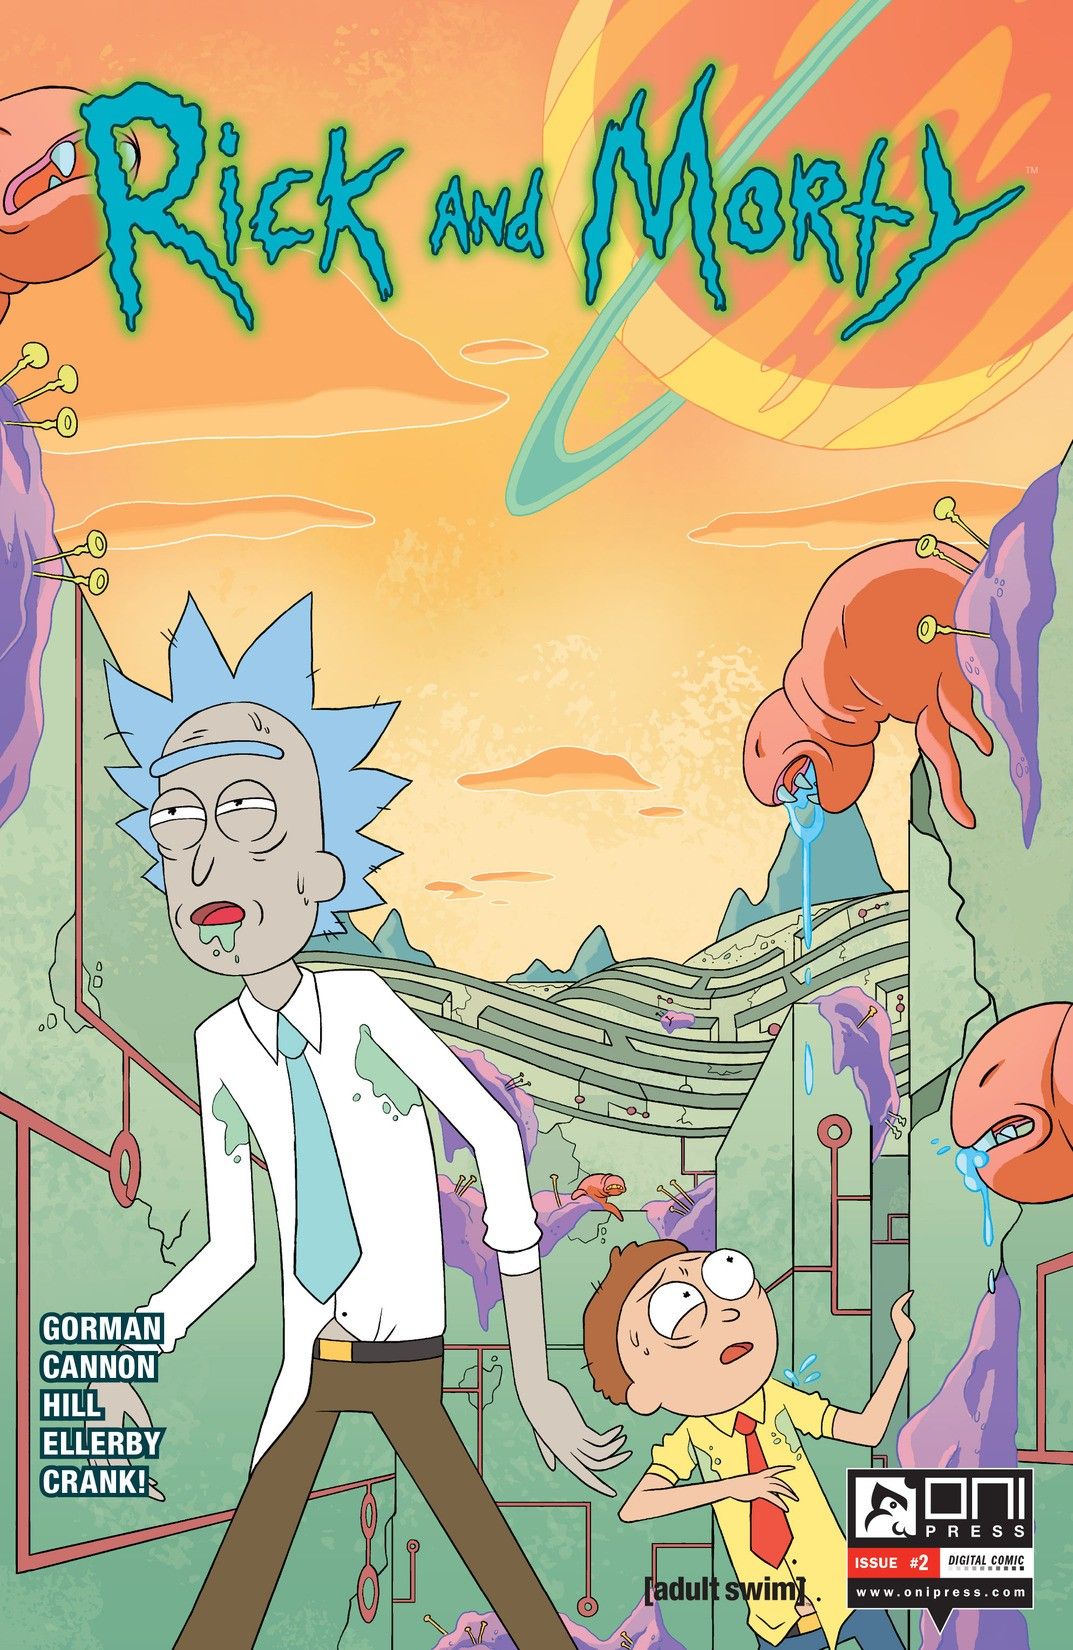 Rick and Morty Issue 2 | Rick and Morty Wiki | FANDOM powered by Wikia